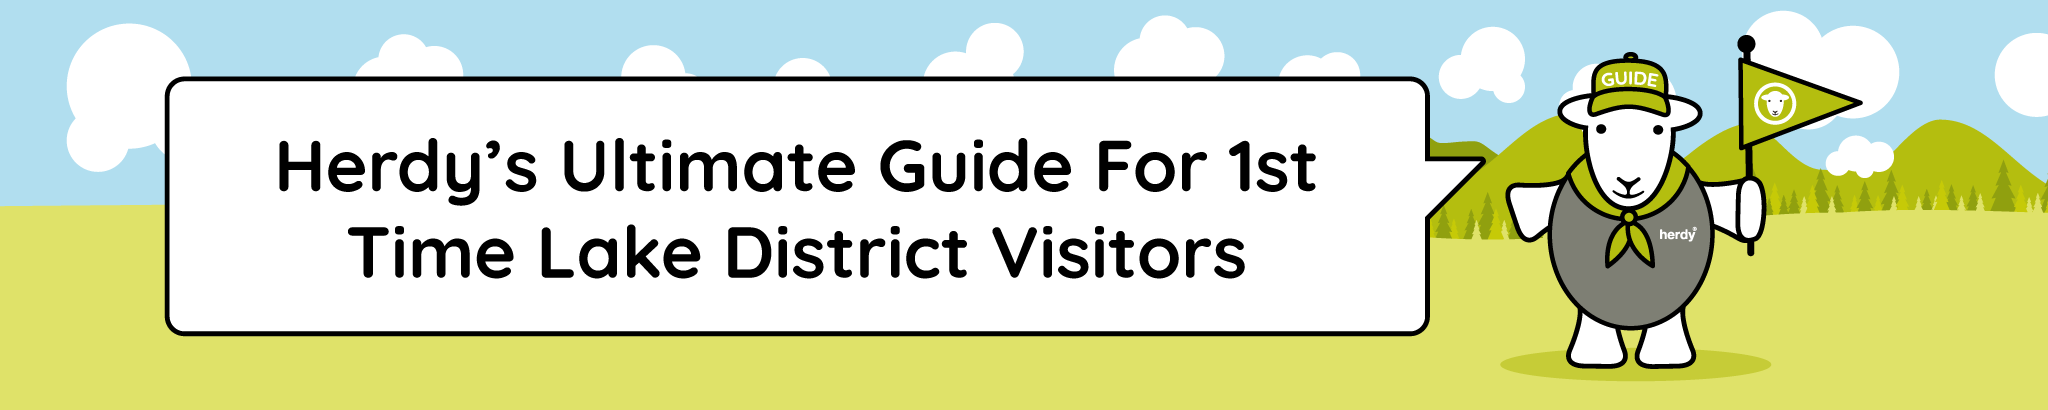 Herdy's ultimate guide for 1st time Lake District visitors